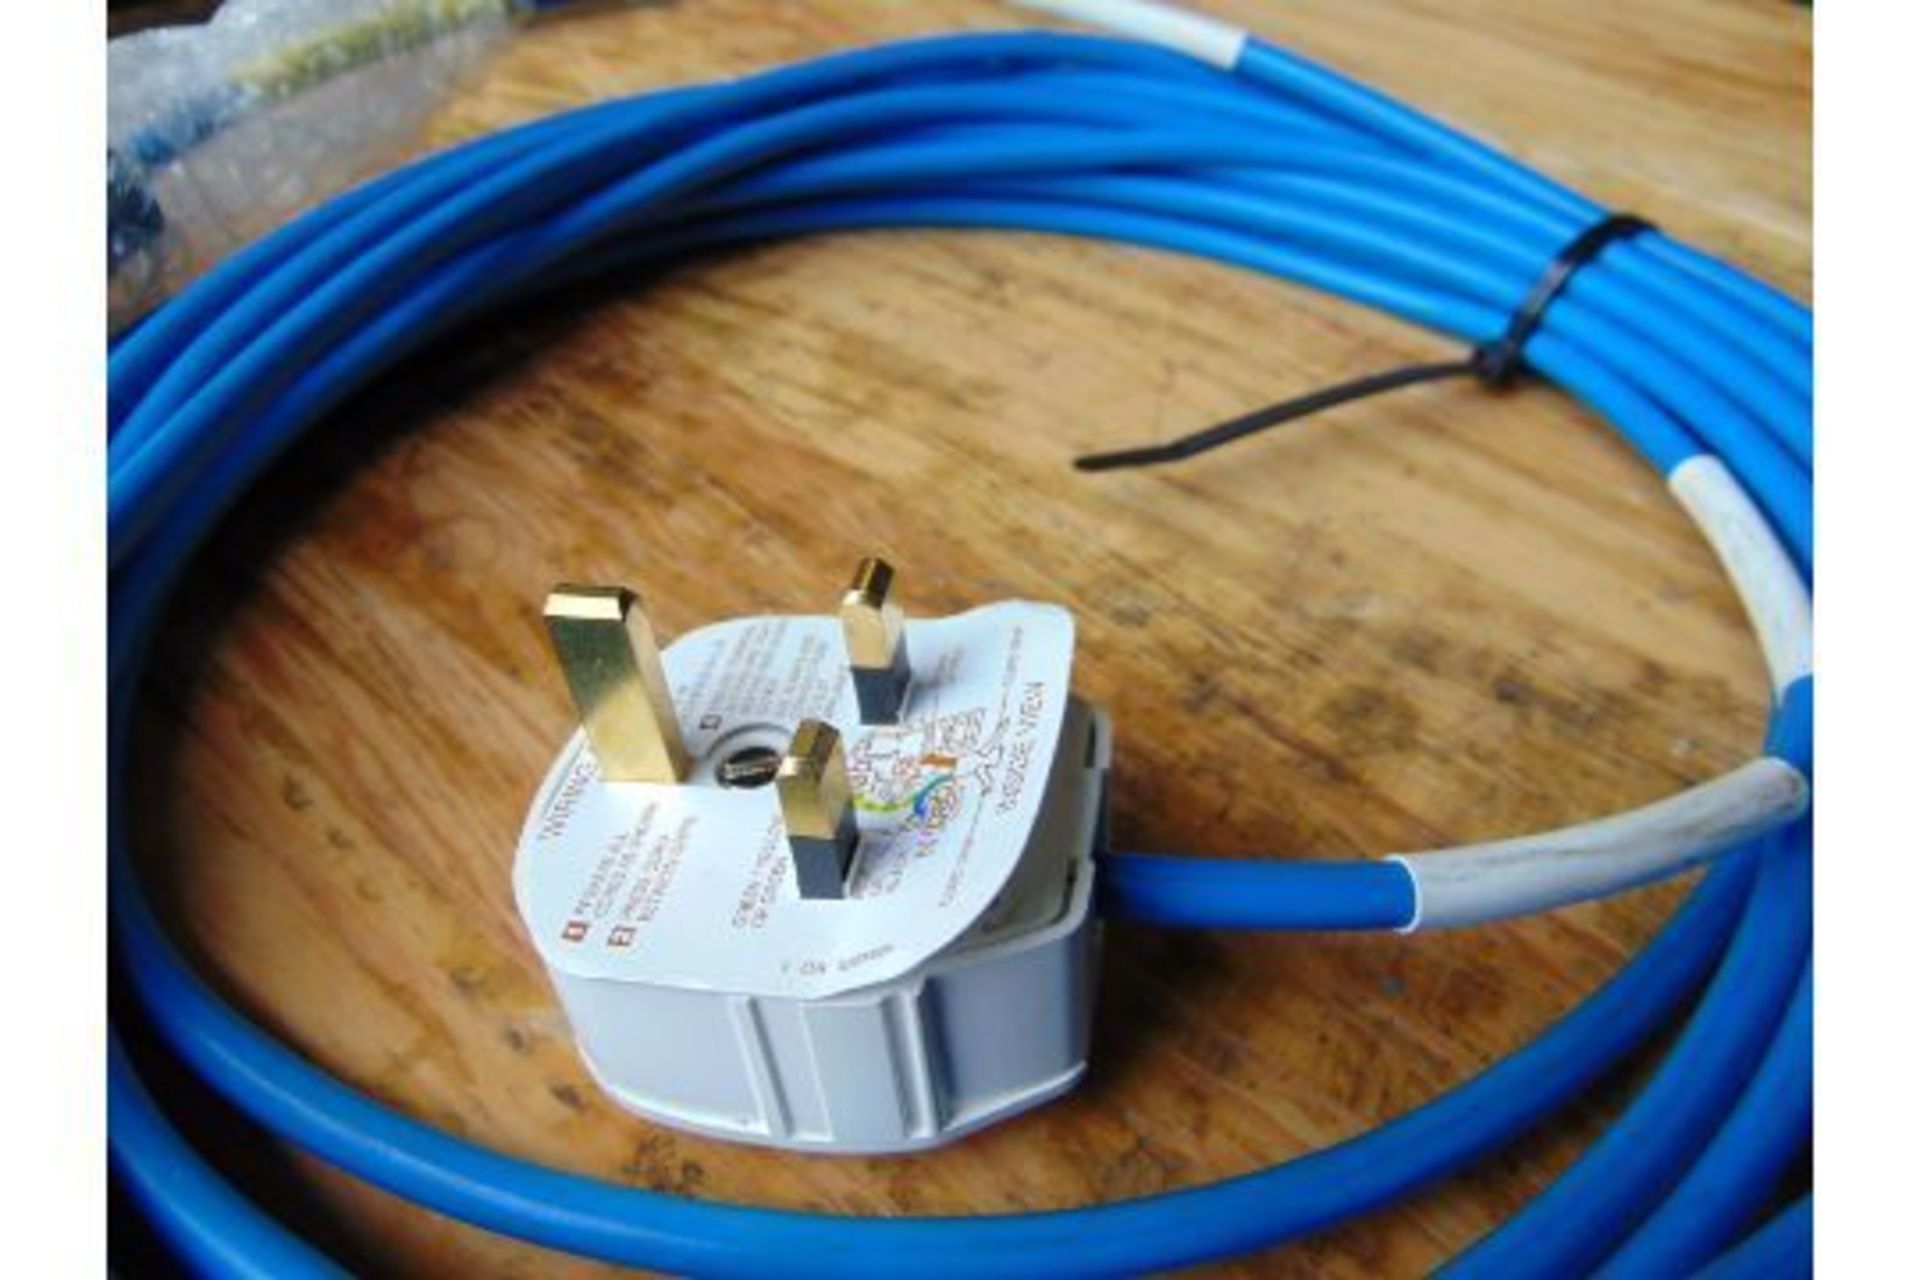 You are bidding on 2 x Extension Power Cables - Image 3 of 4